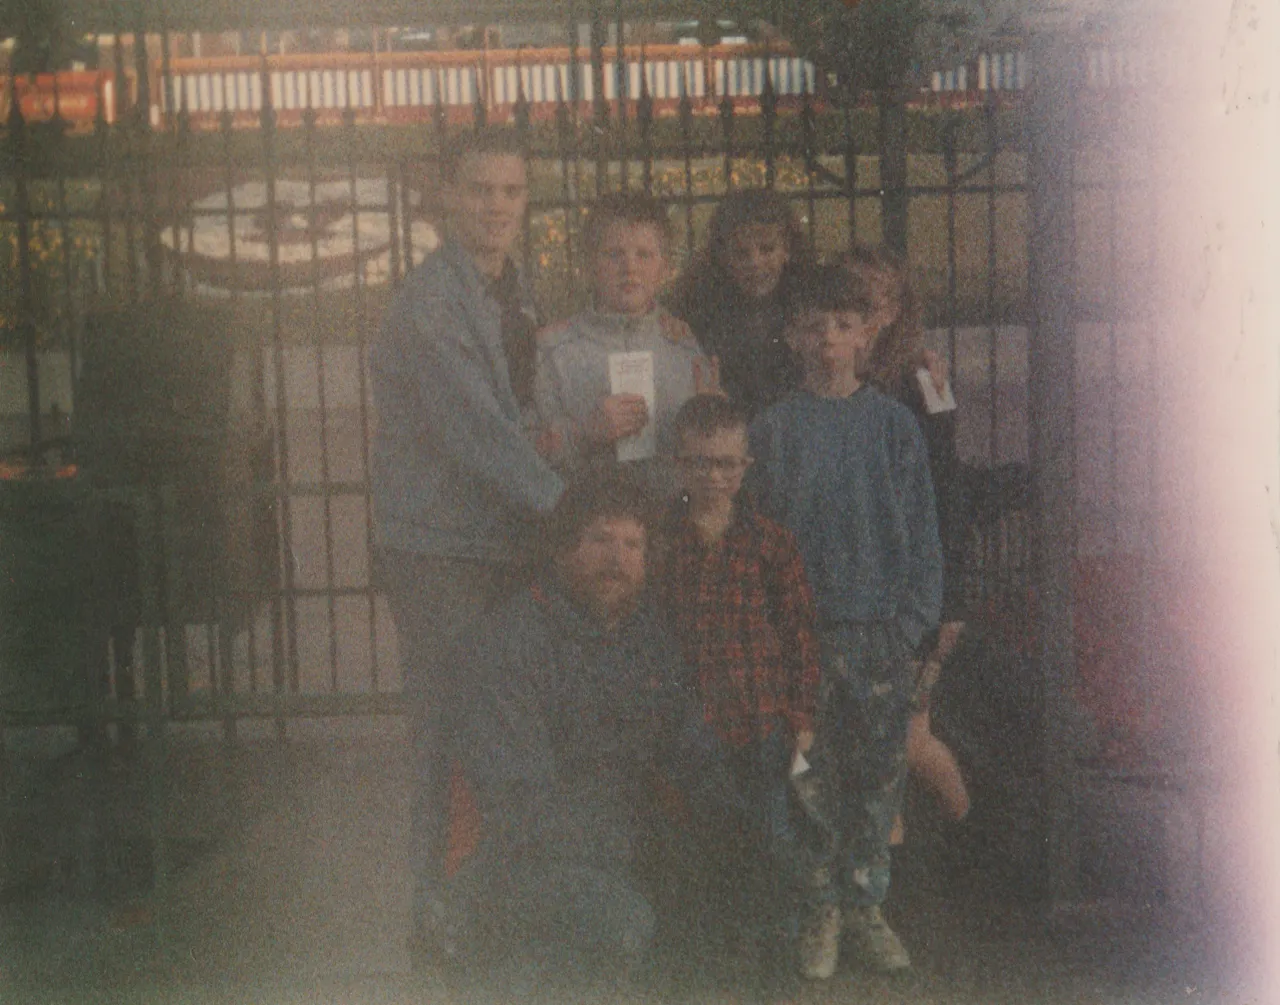 1992-12-25 apx - Disneyland - like on a Saturday - like 6 AM or so - fam and relatives pic.png